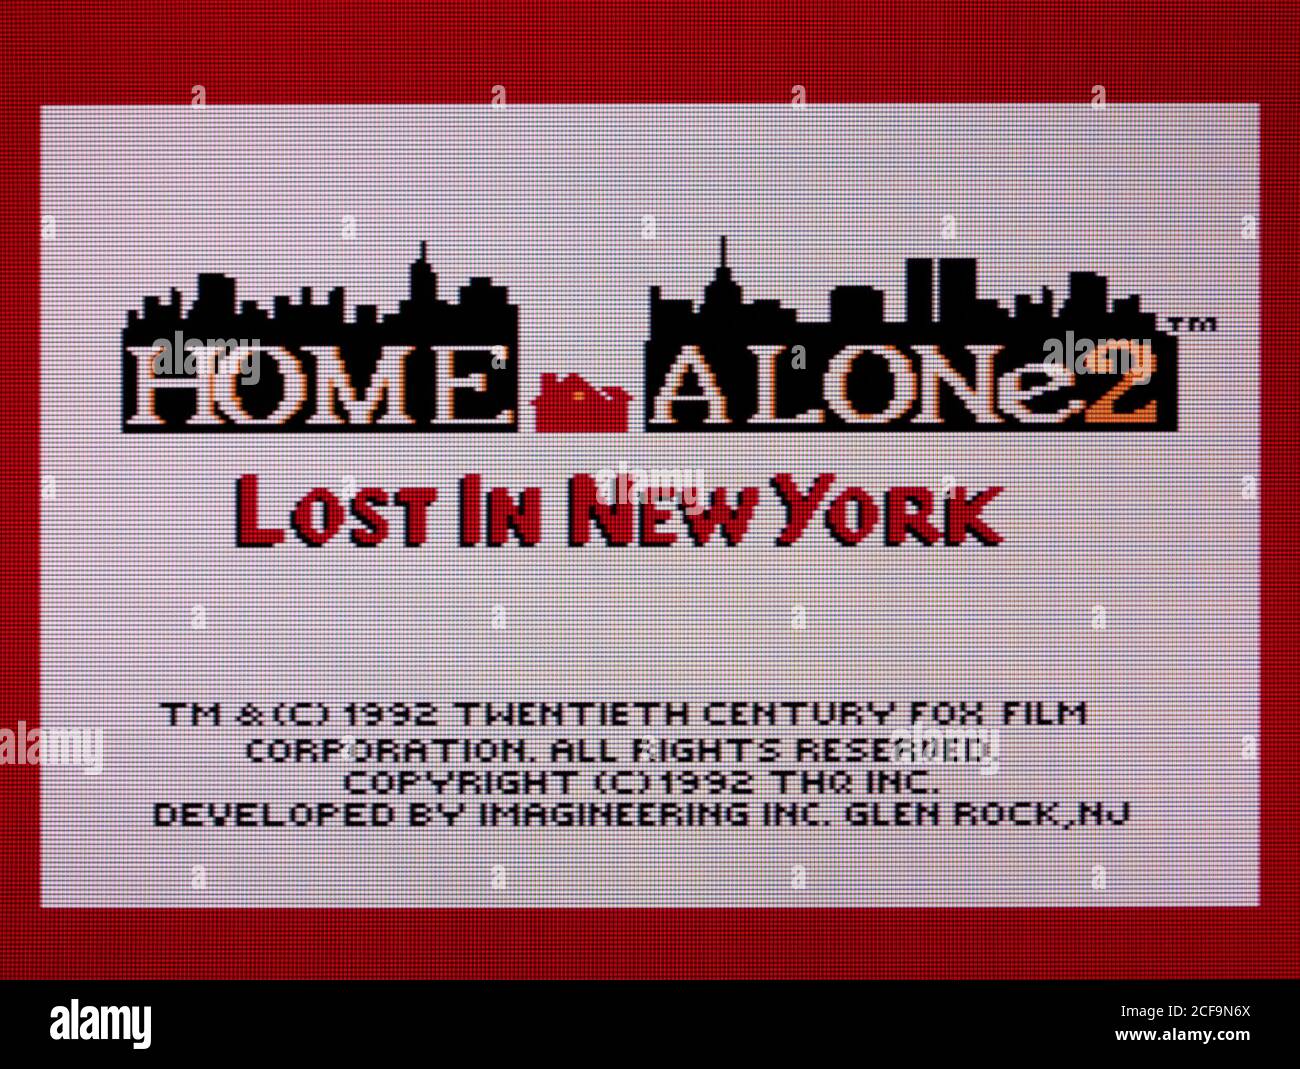 Home Alone 2 Lost in New York - Nintendo Entertainment System - NES Videogame - Editorial use only Stock Photo